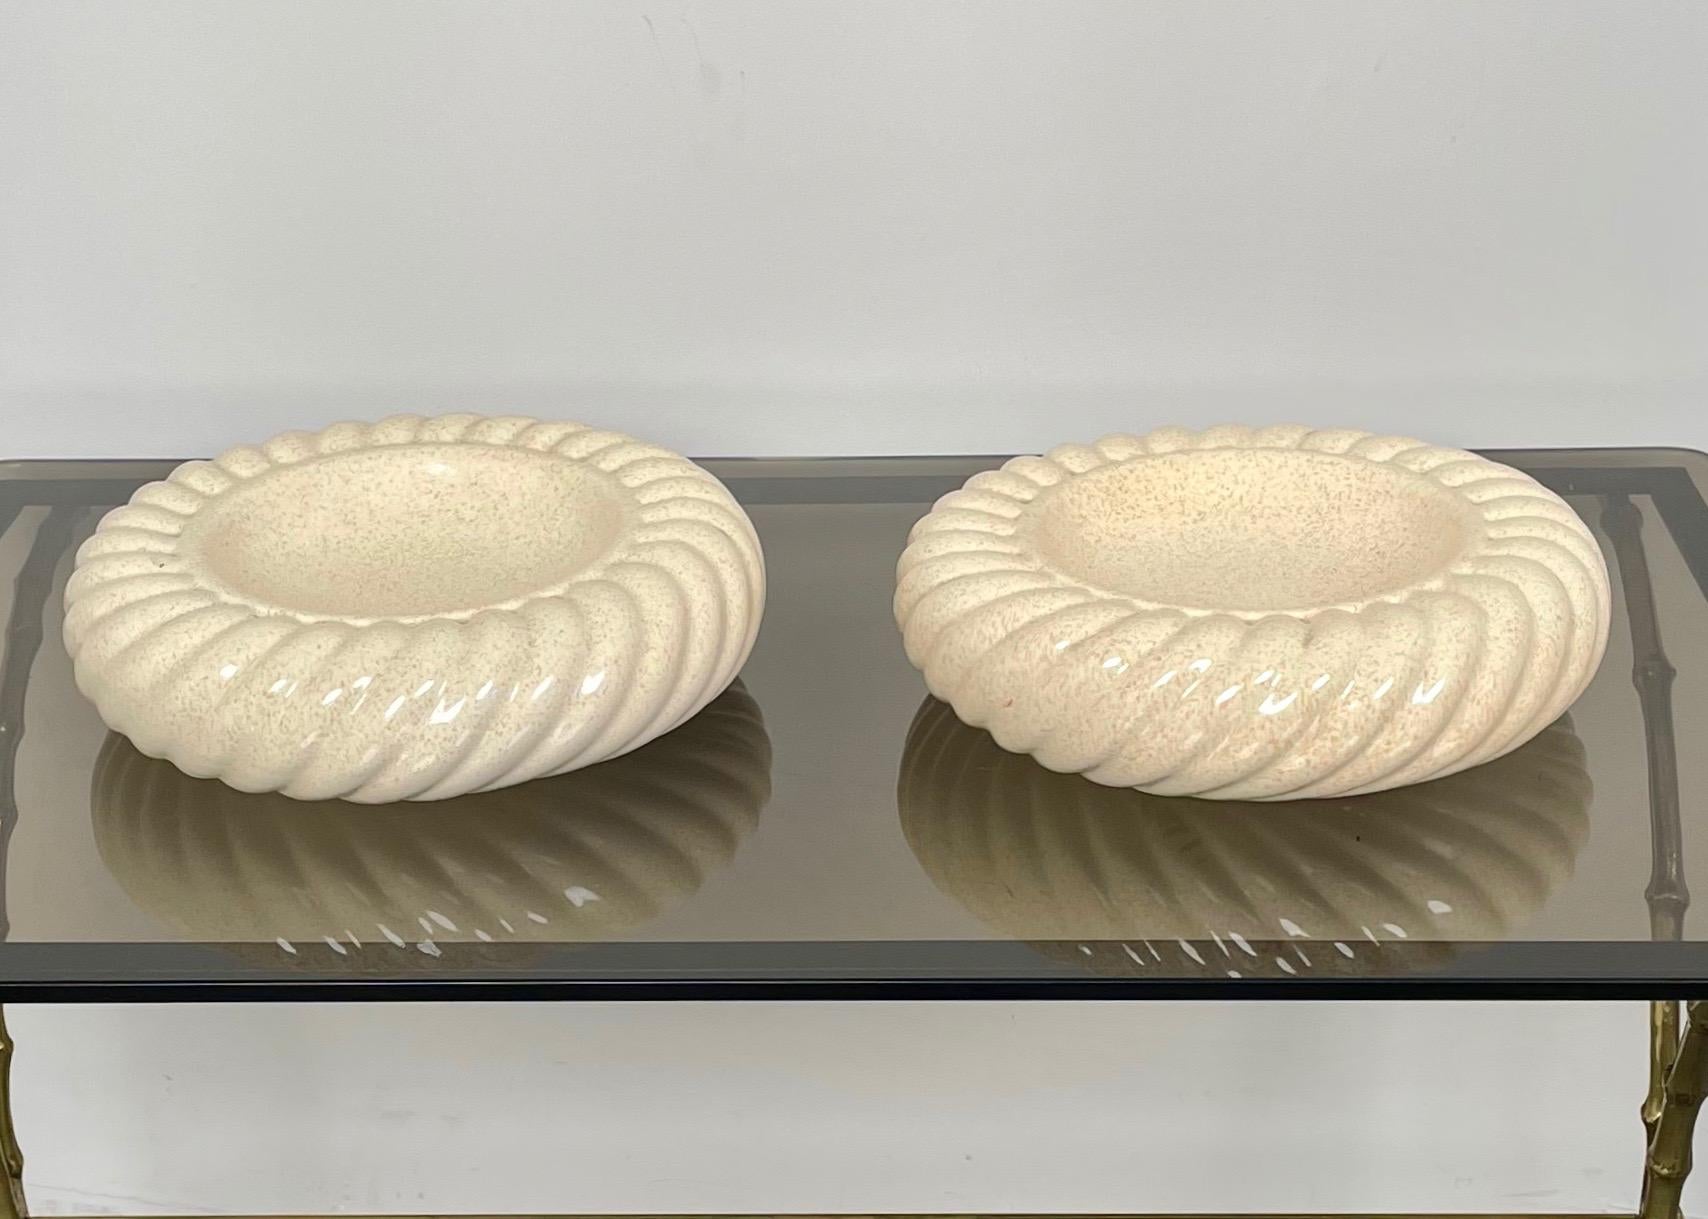 Pair of ashtrays vide-poche in beige ceramic by Tommaso Barbi for B Ceramiche, Italy 1970s.

Tommaso Barbi's original stamp is still visible on the bottom of both items, as shown in photos.